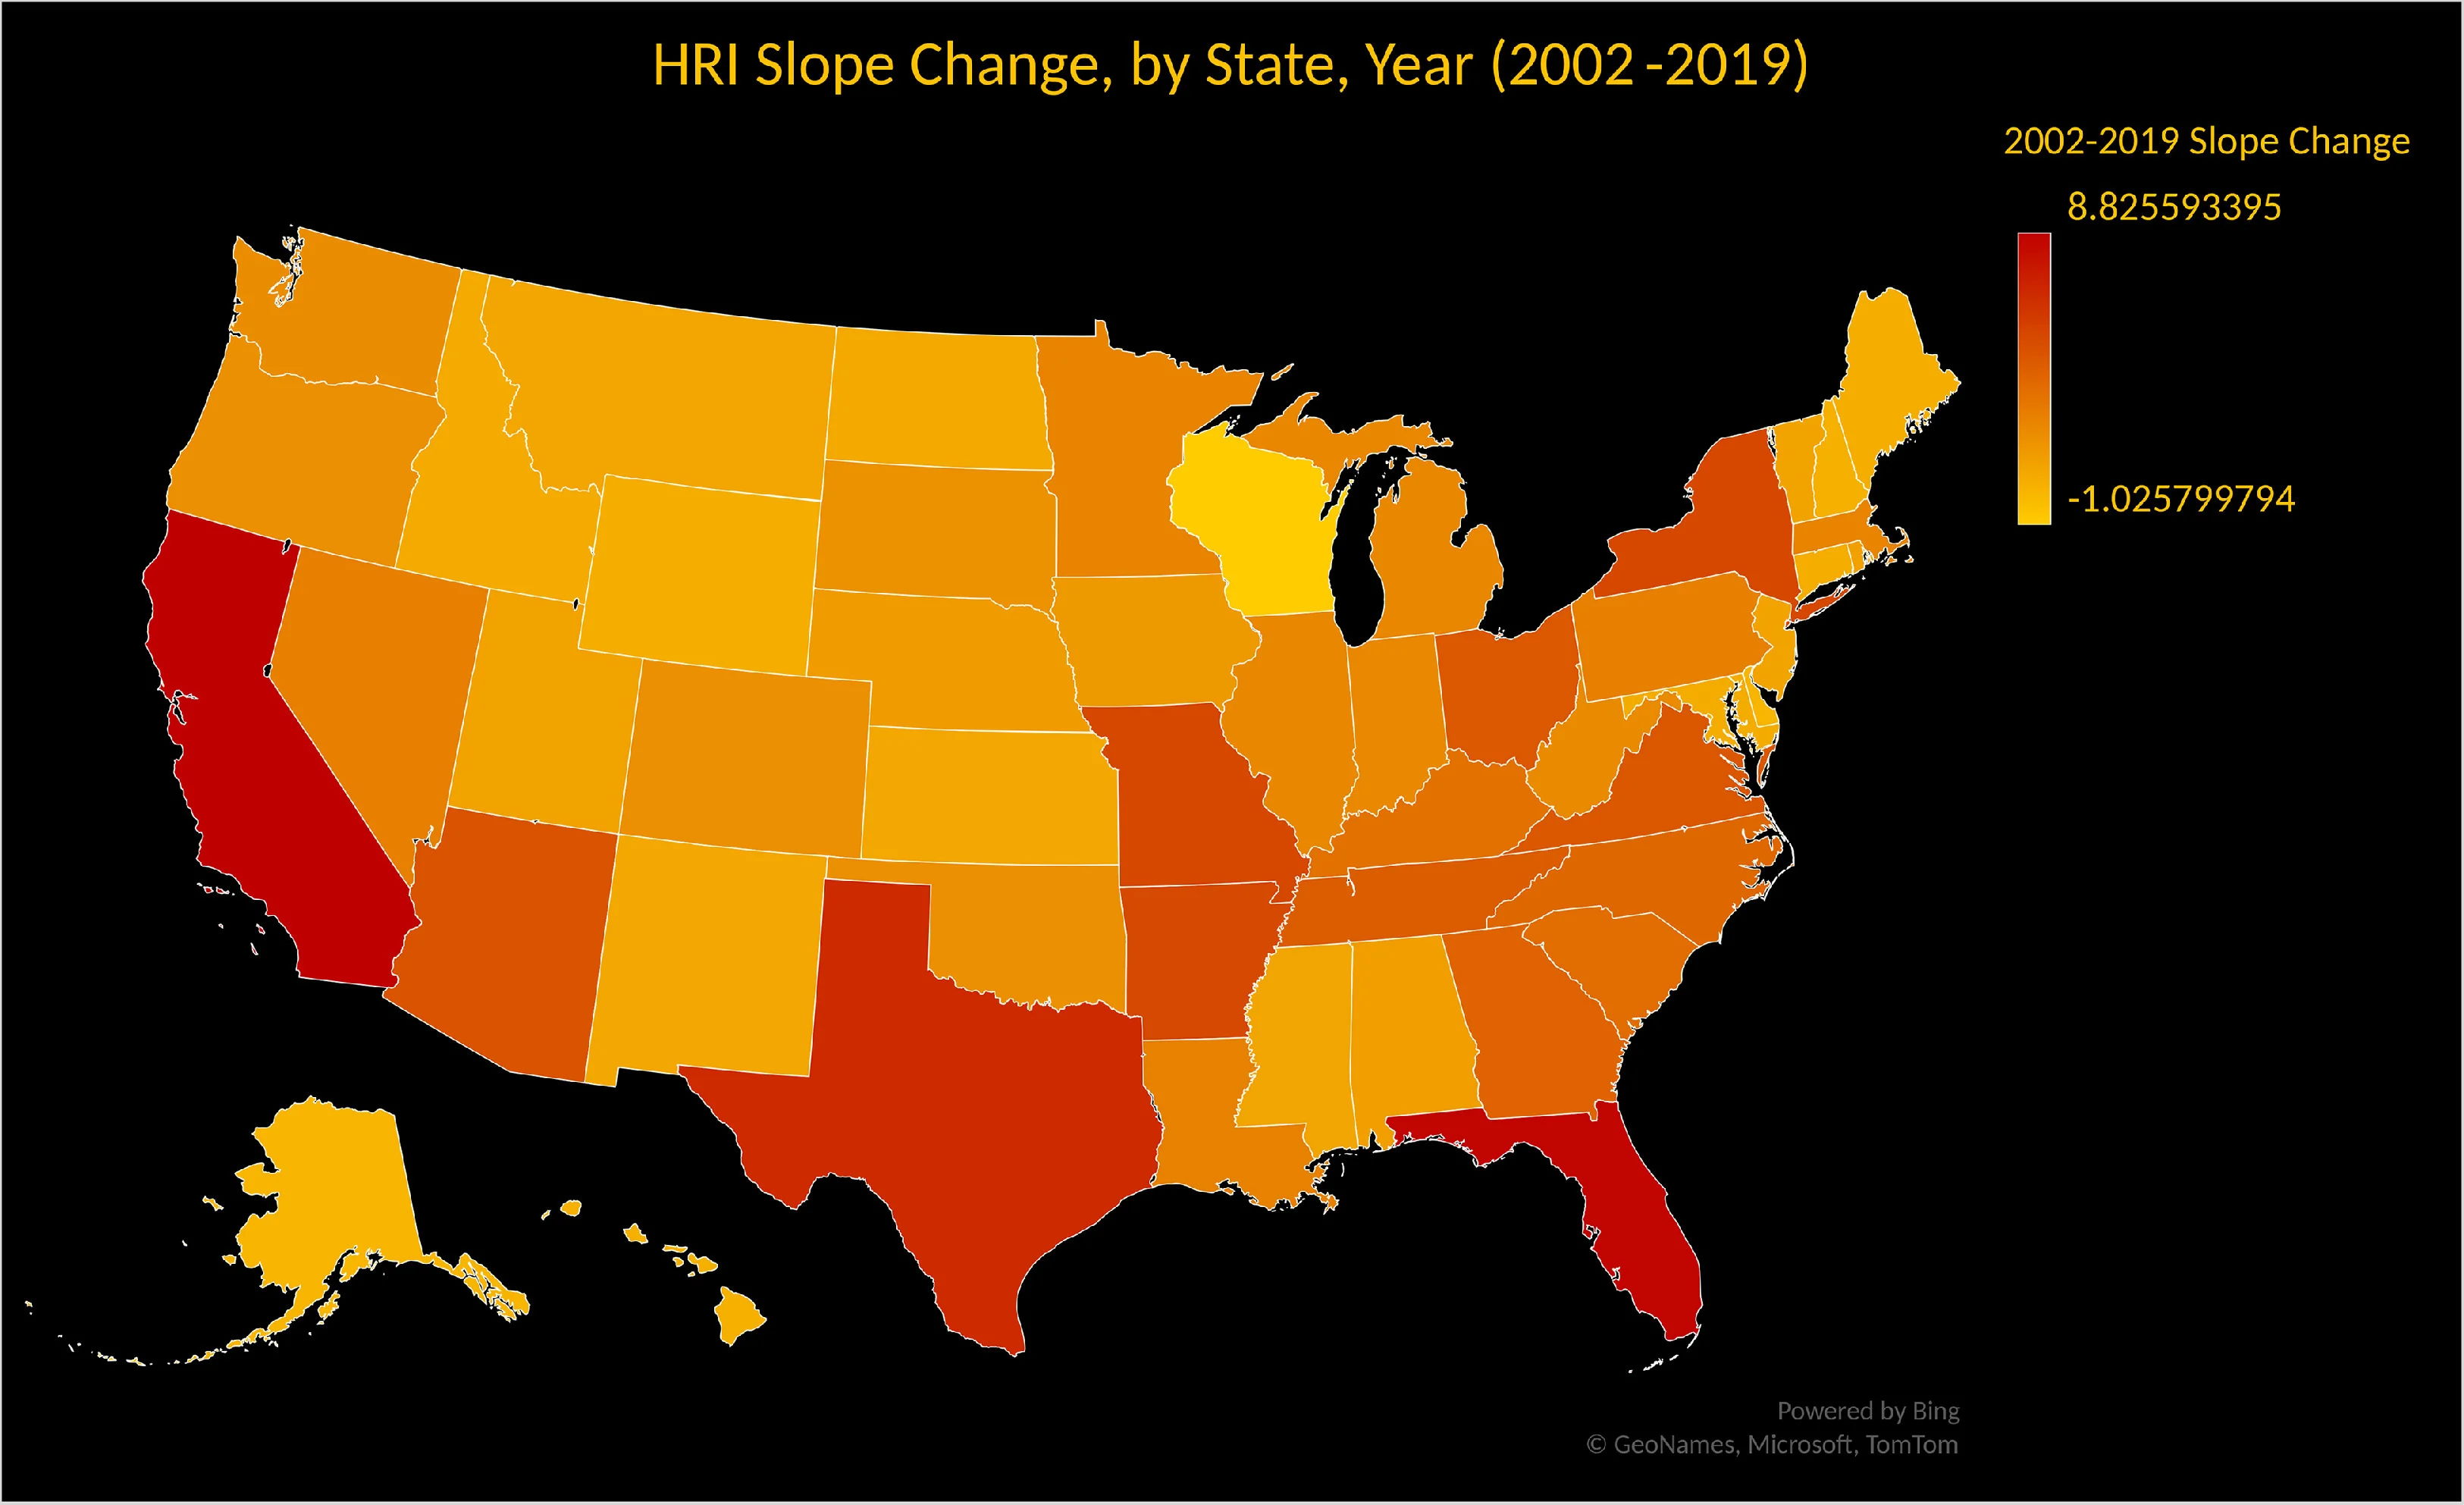 HRI slope change by US state 2002 - 2019